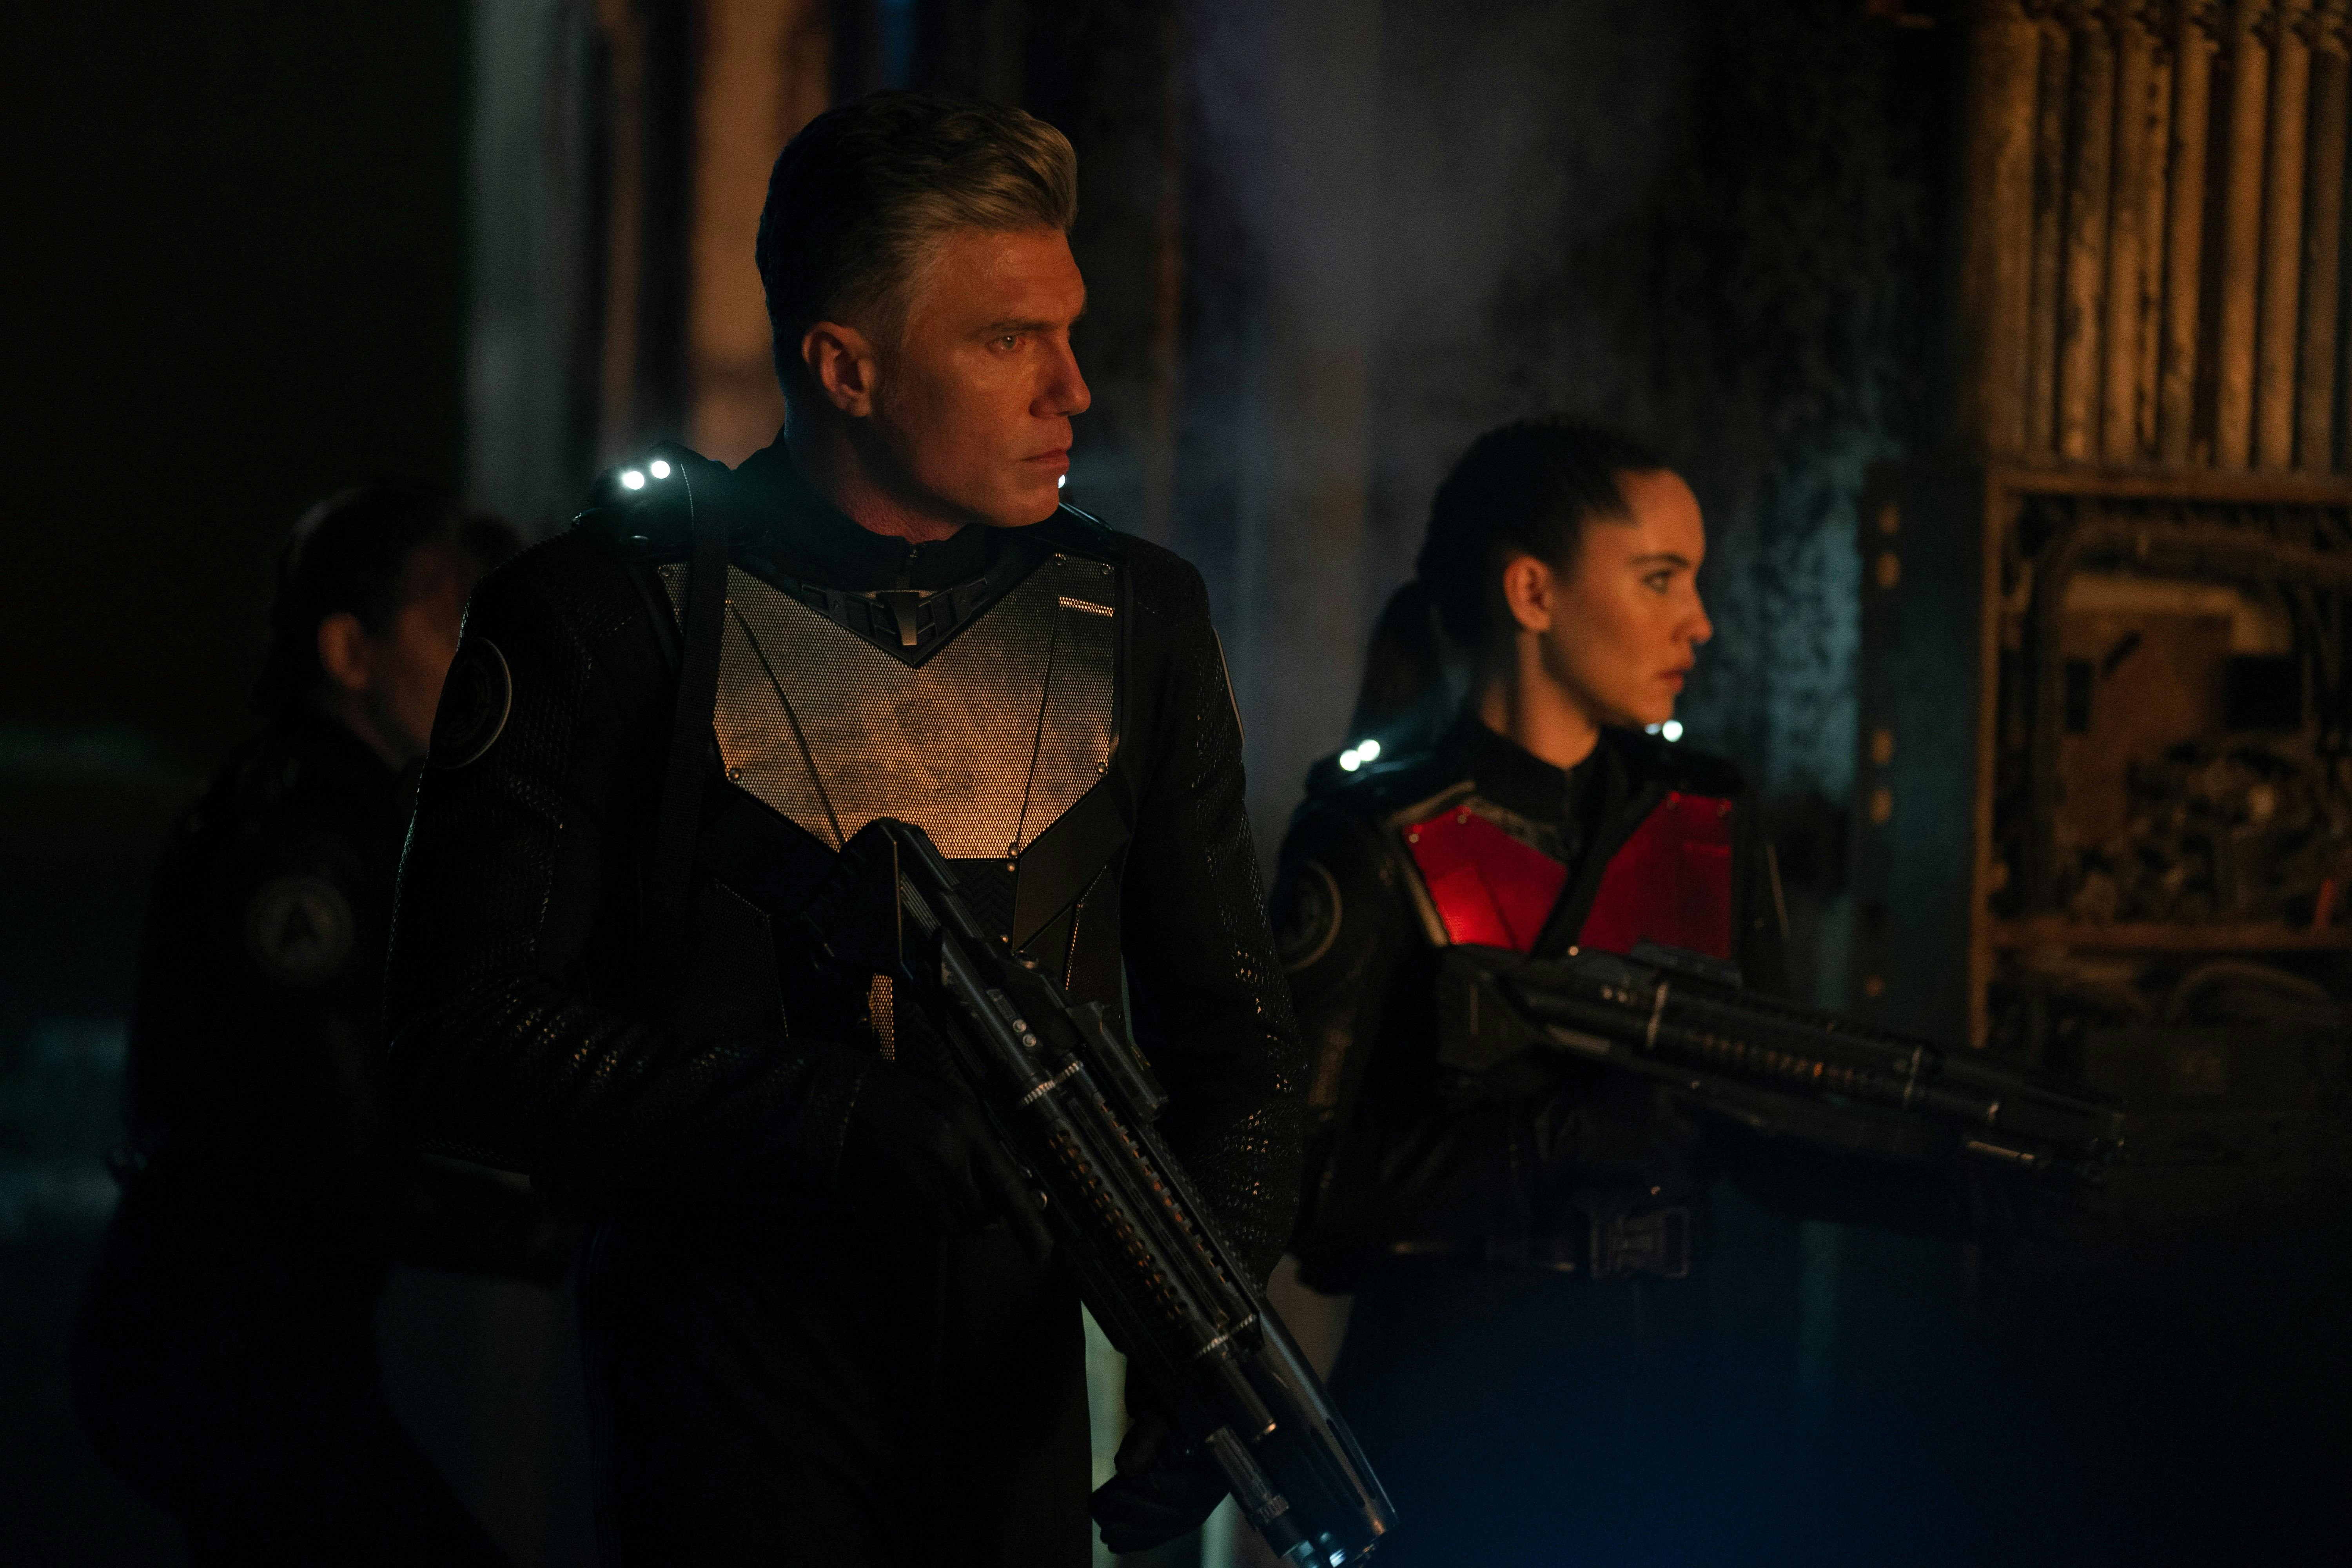 Captain Pike (Strange New Worlds) and La'An wear tactical uniforms and hold phaser rifles. They are looking around.